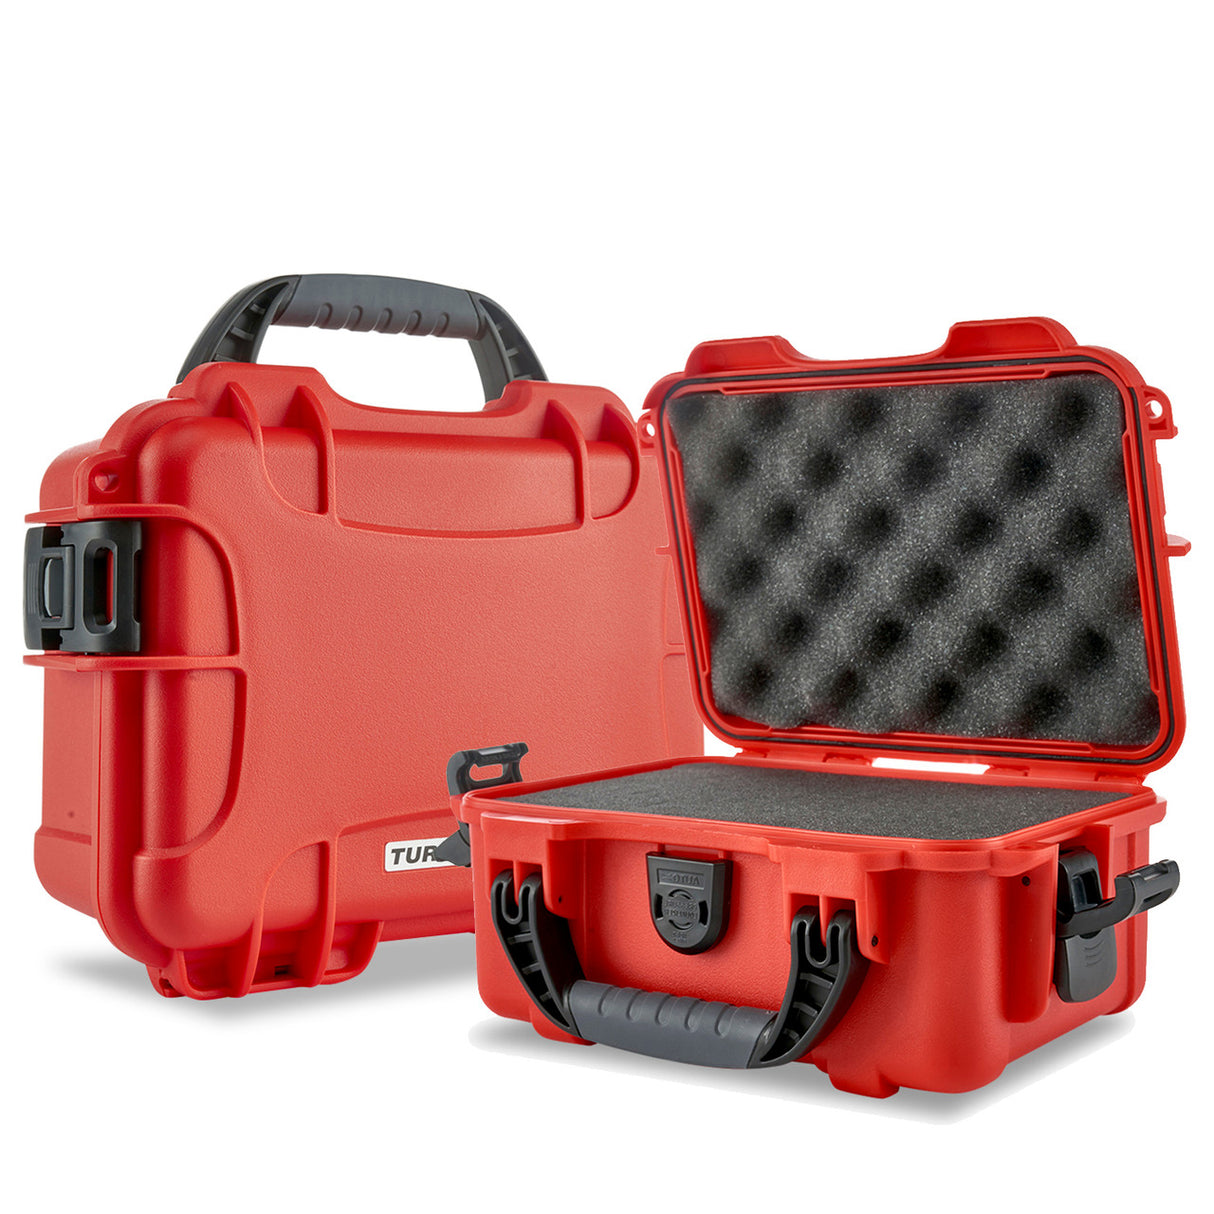 Small Turtle Case in red